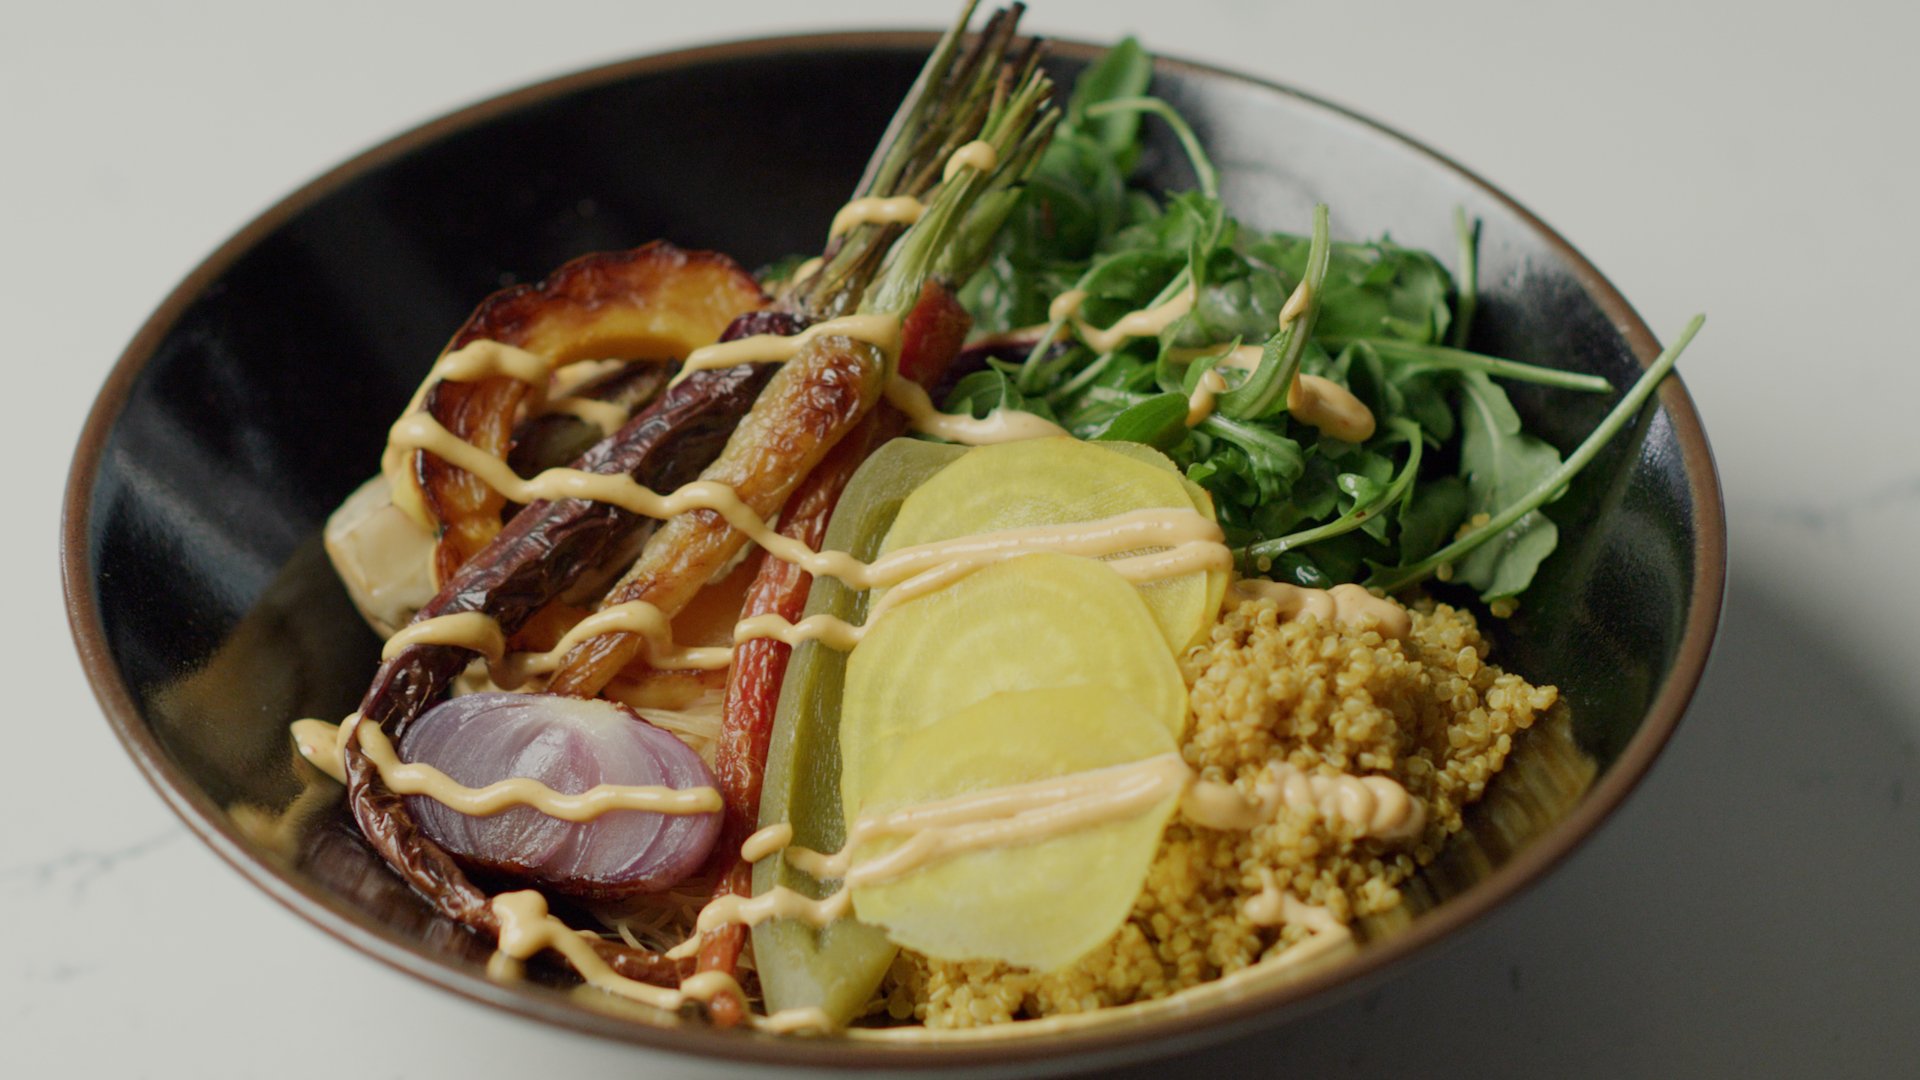 Rice Noodle Bowl with Roasted Veggies and Curried Quinoa